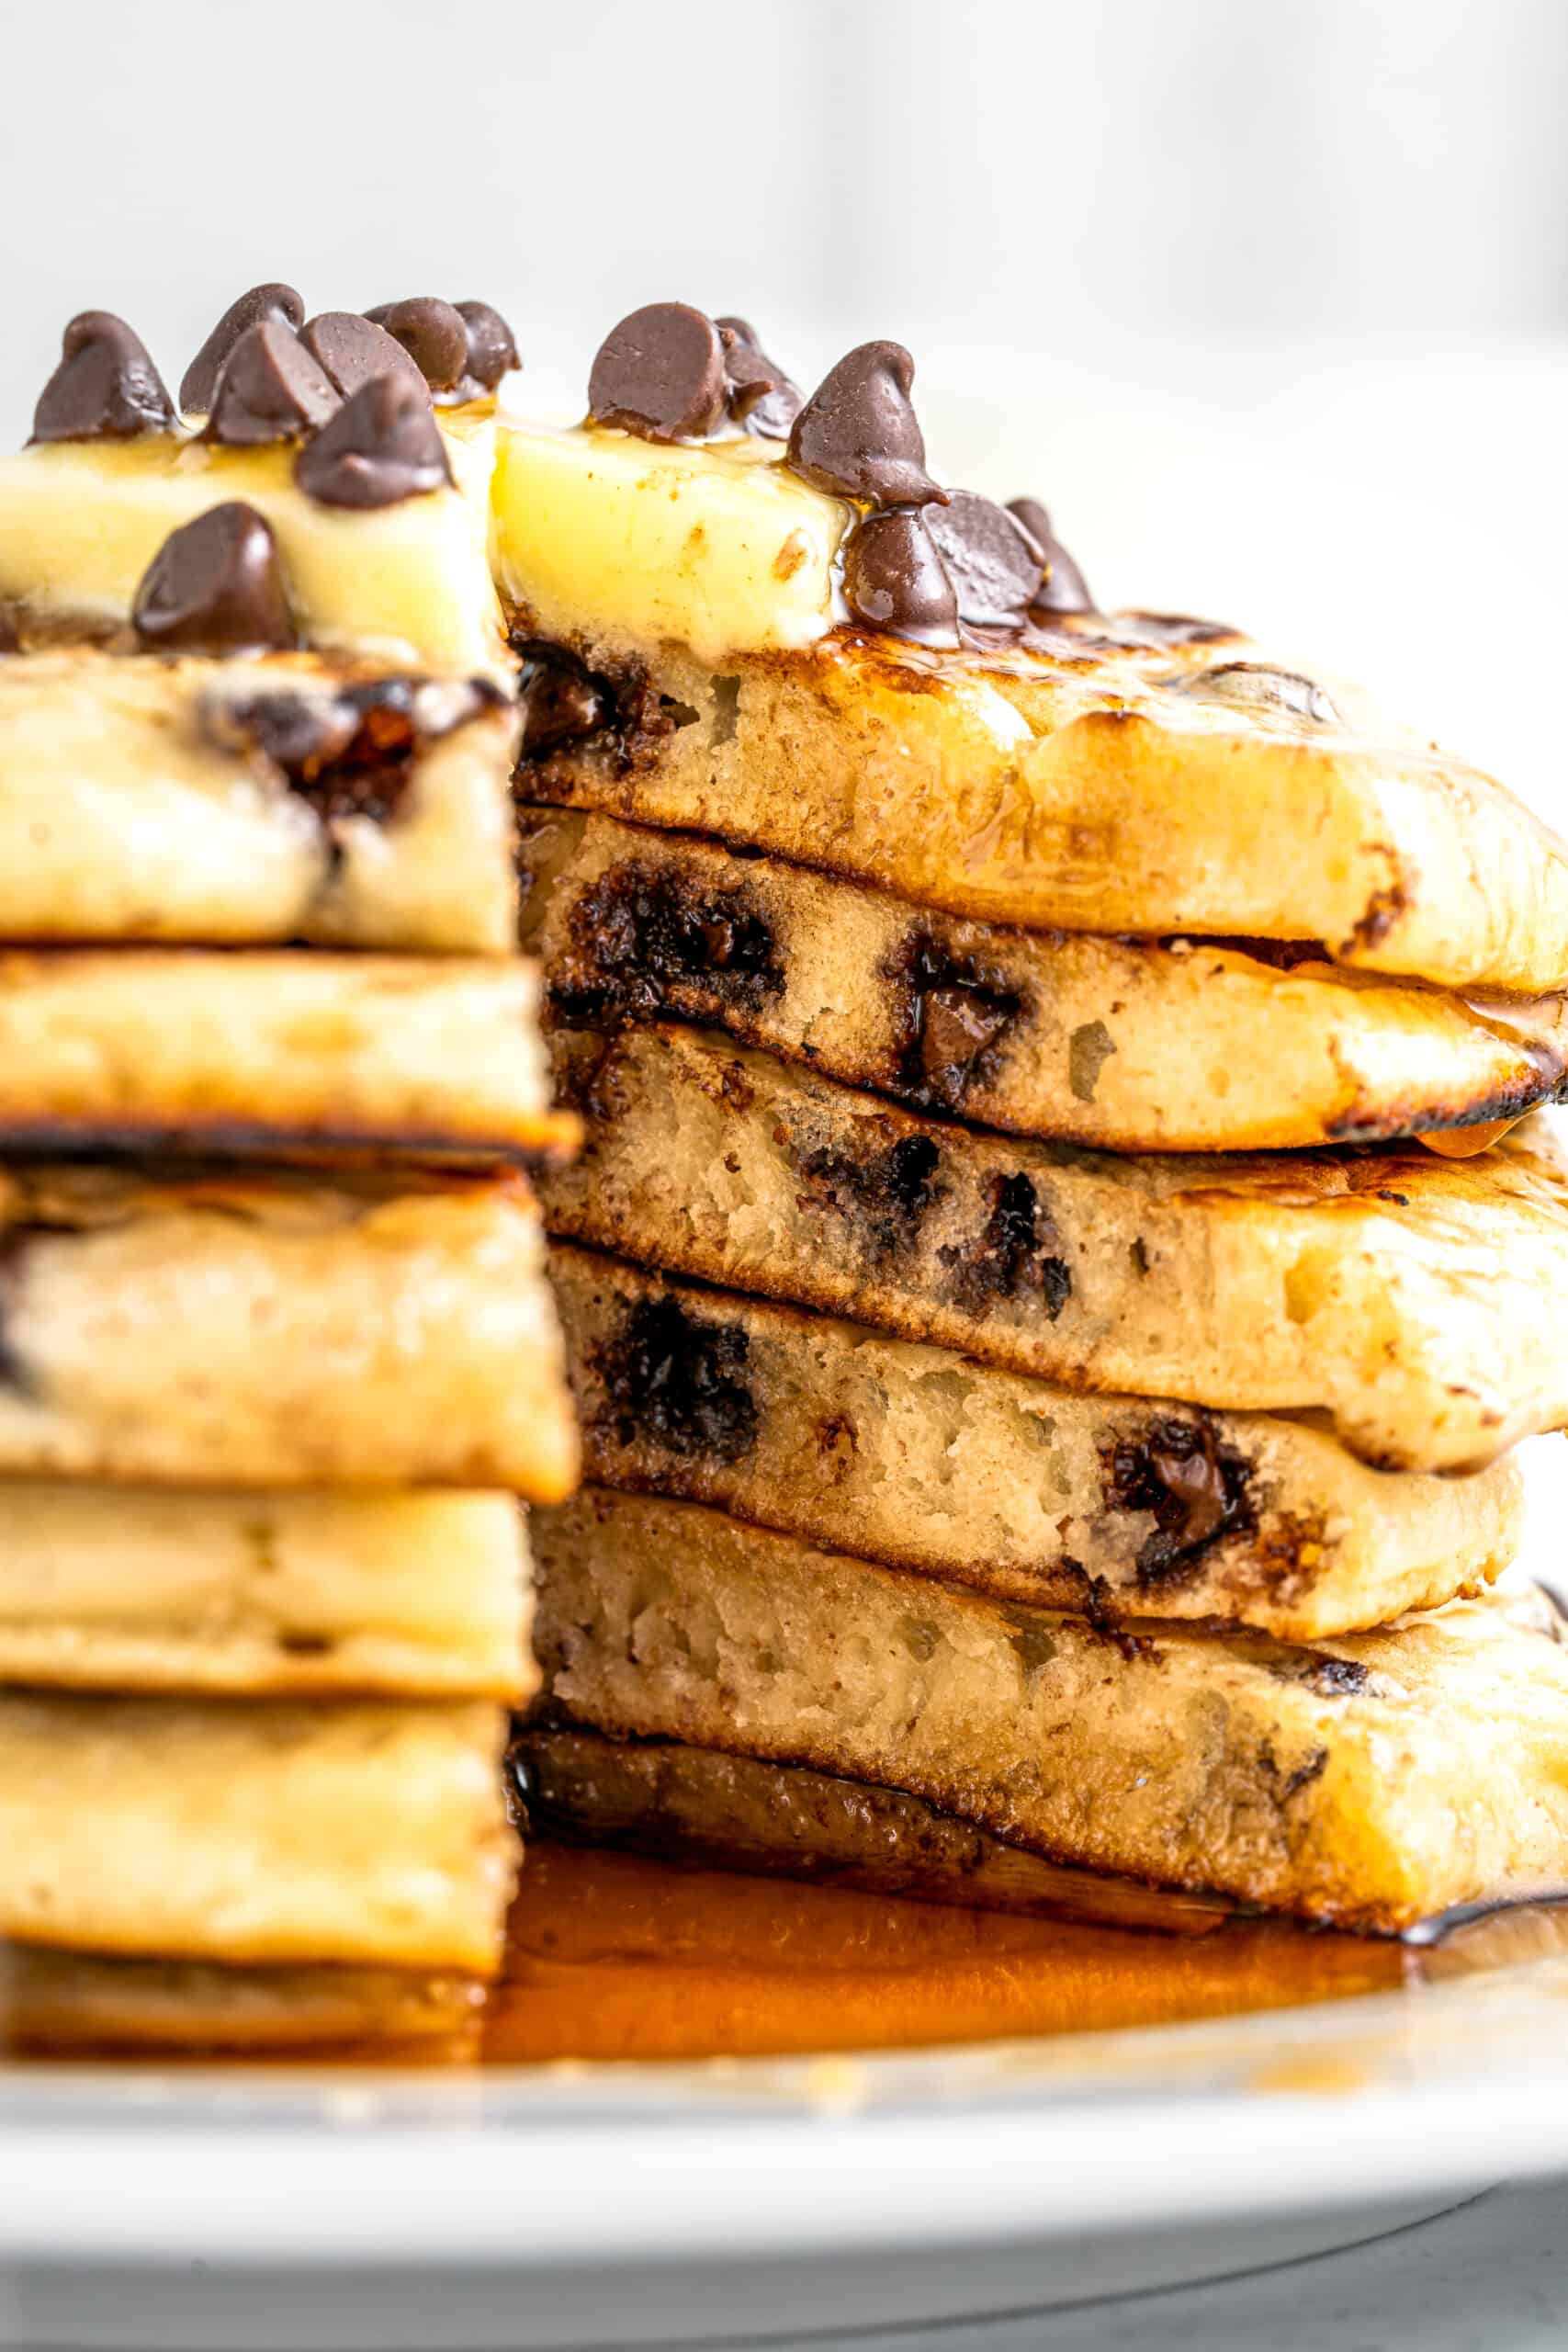 Stacked Chocolate Chip Pancakes
